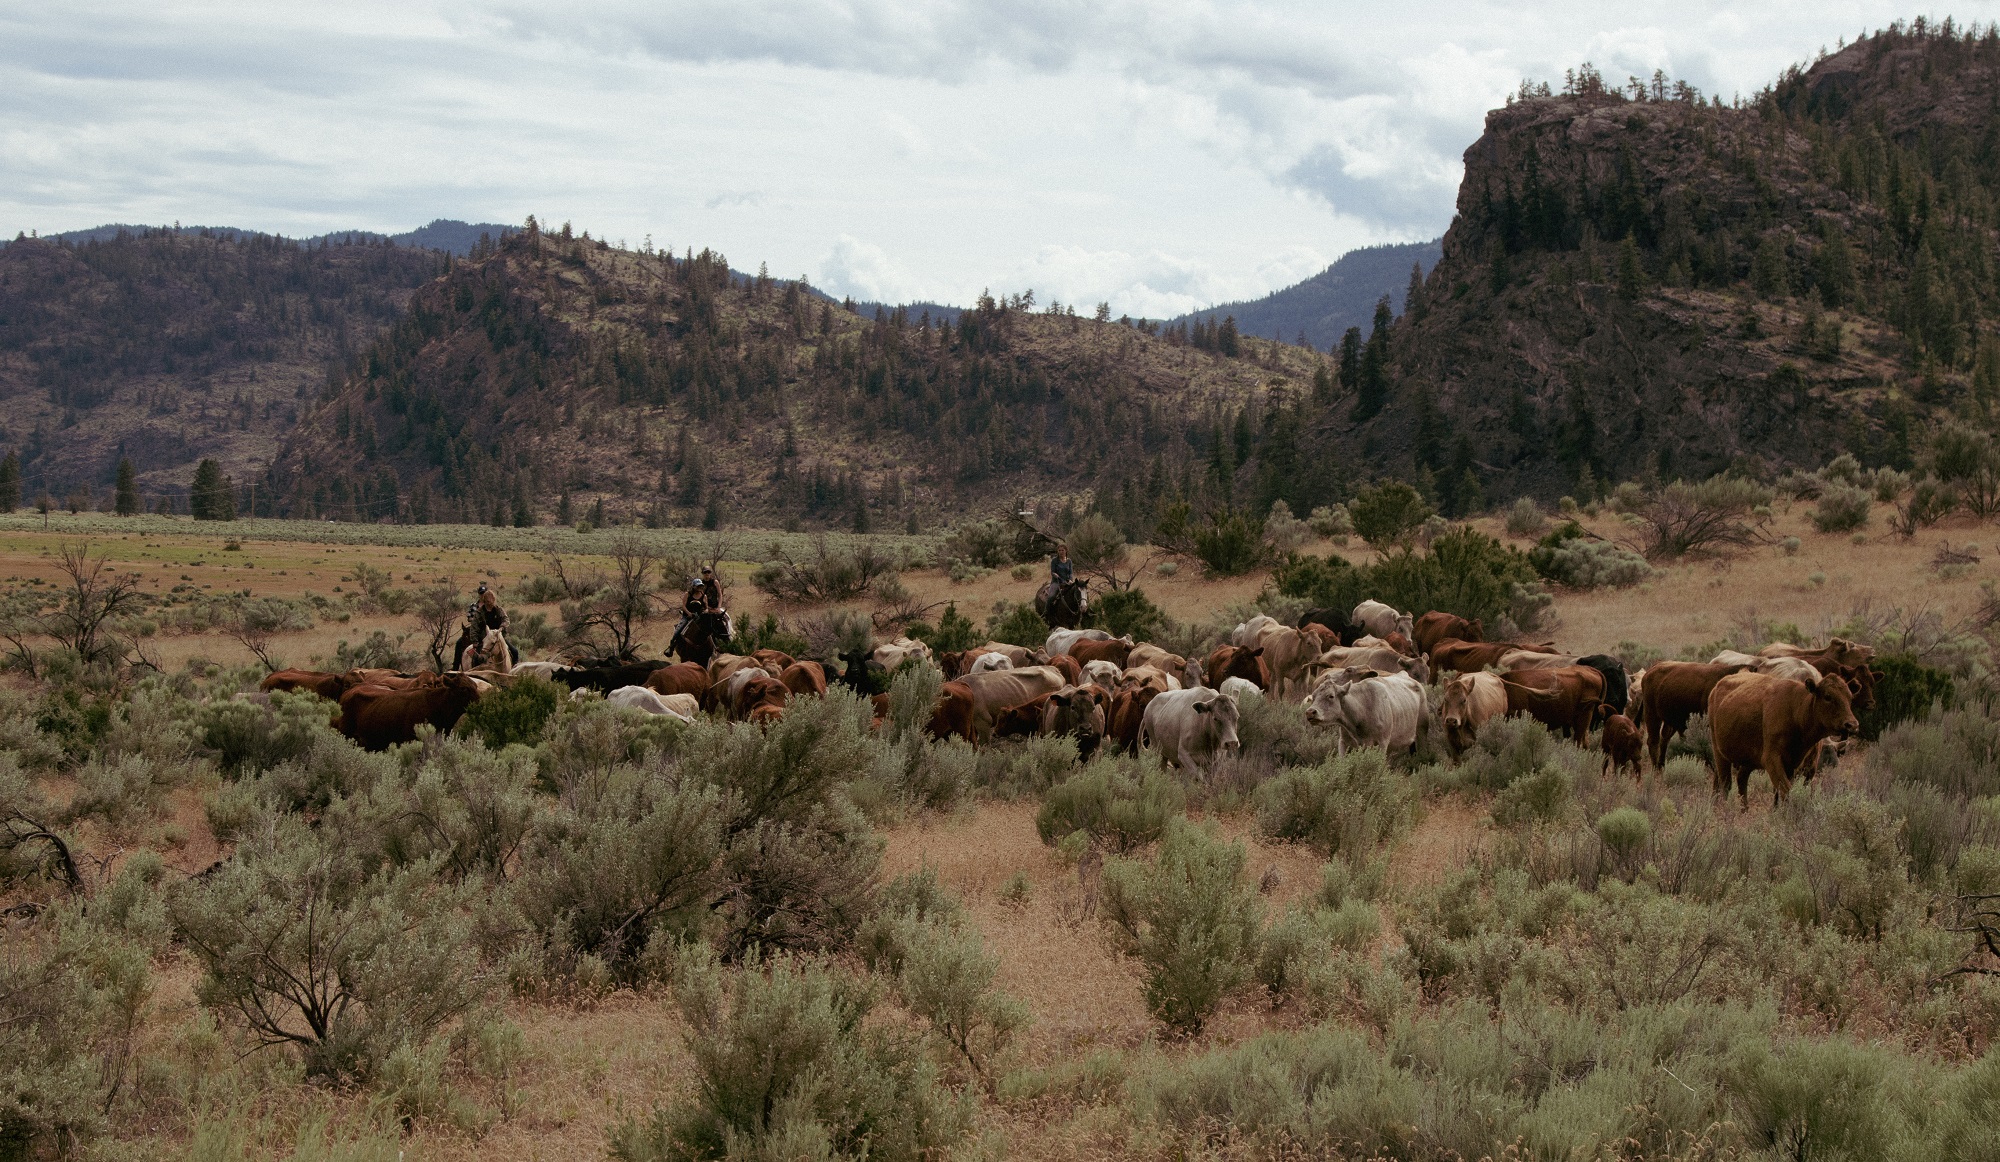 A herd of cattle are gathered on the flats, three riders stand guard. The cattle walk into sage-brush the height of their underbellies. In the distance, rock mountains sparsely populated by trees just upwards from the plateau.